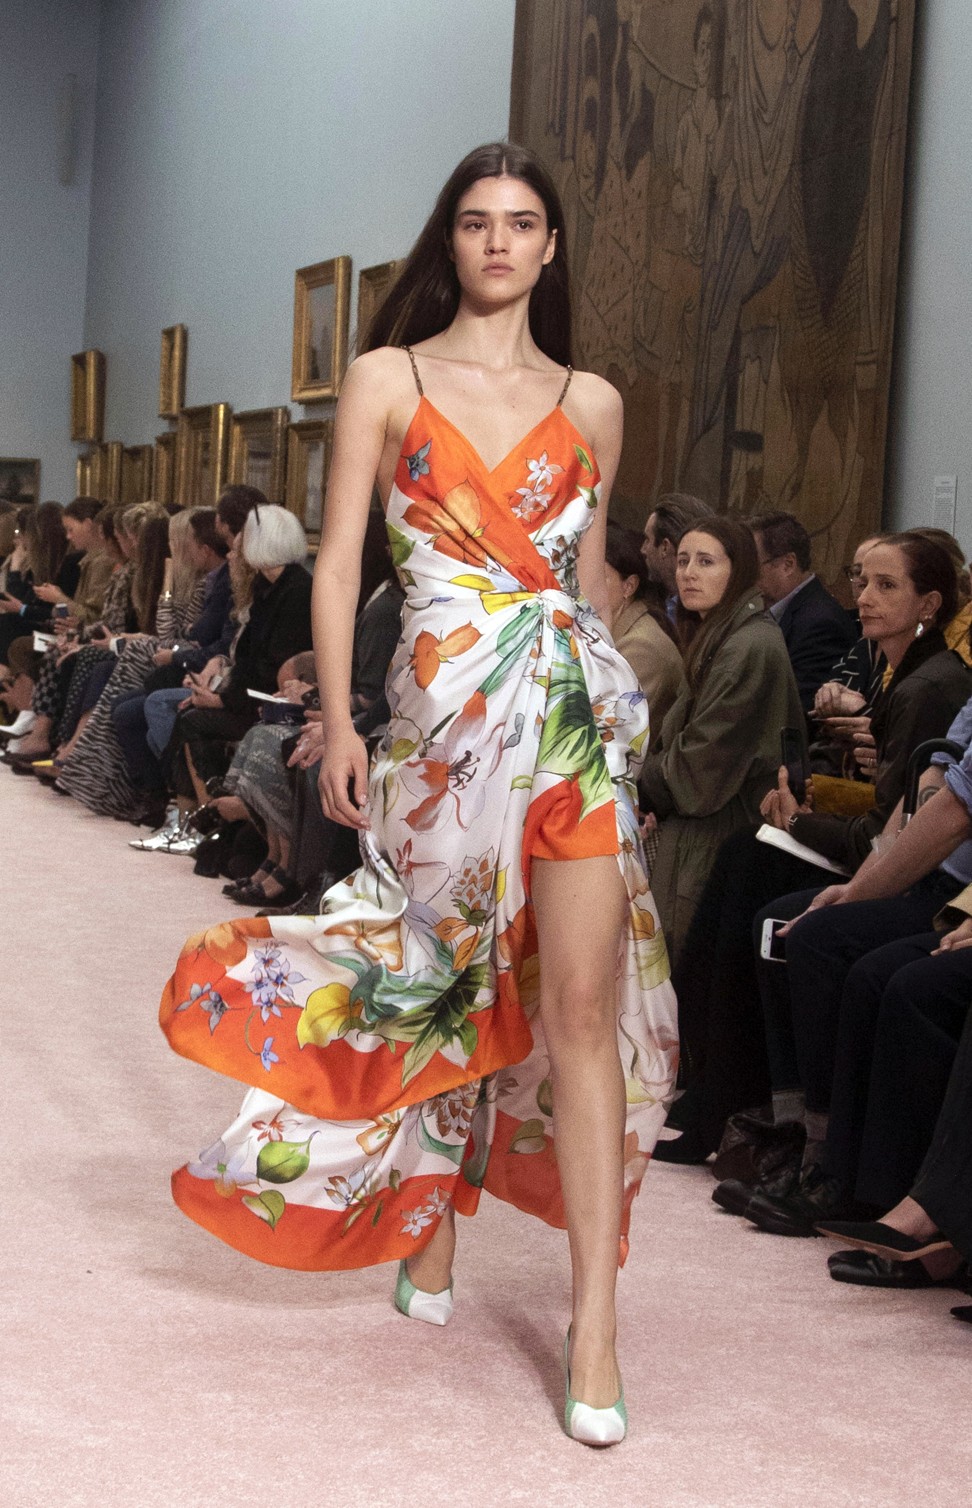 A model presents a voluminous, floor-length floral dress from creative director Wes Gordon’s debut Carolina Herrera spring-summer 2019 collection during Monday’s show at New York Fashion Week. Photo: EPA-EFE